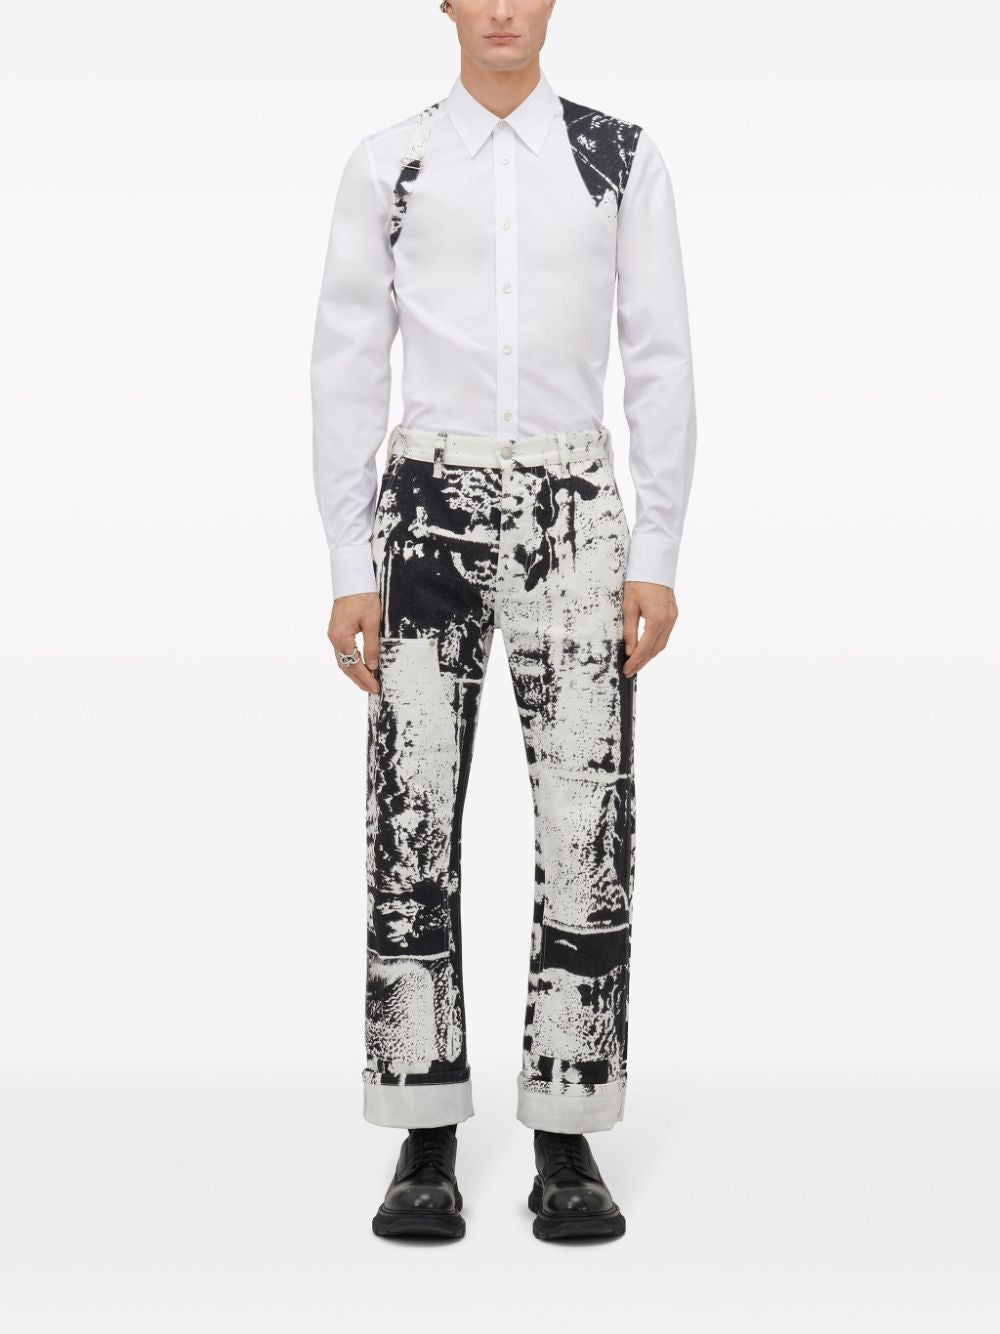 ALEXANDER MCQUEEN Men's Multicolor Workwear Jeans with All-Over 'Fold' Print